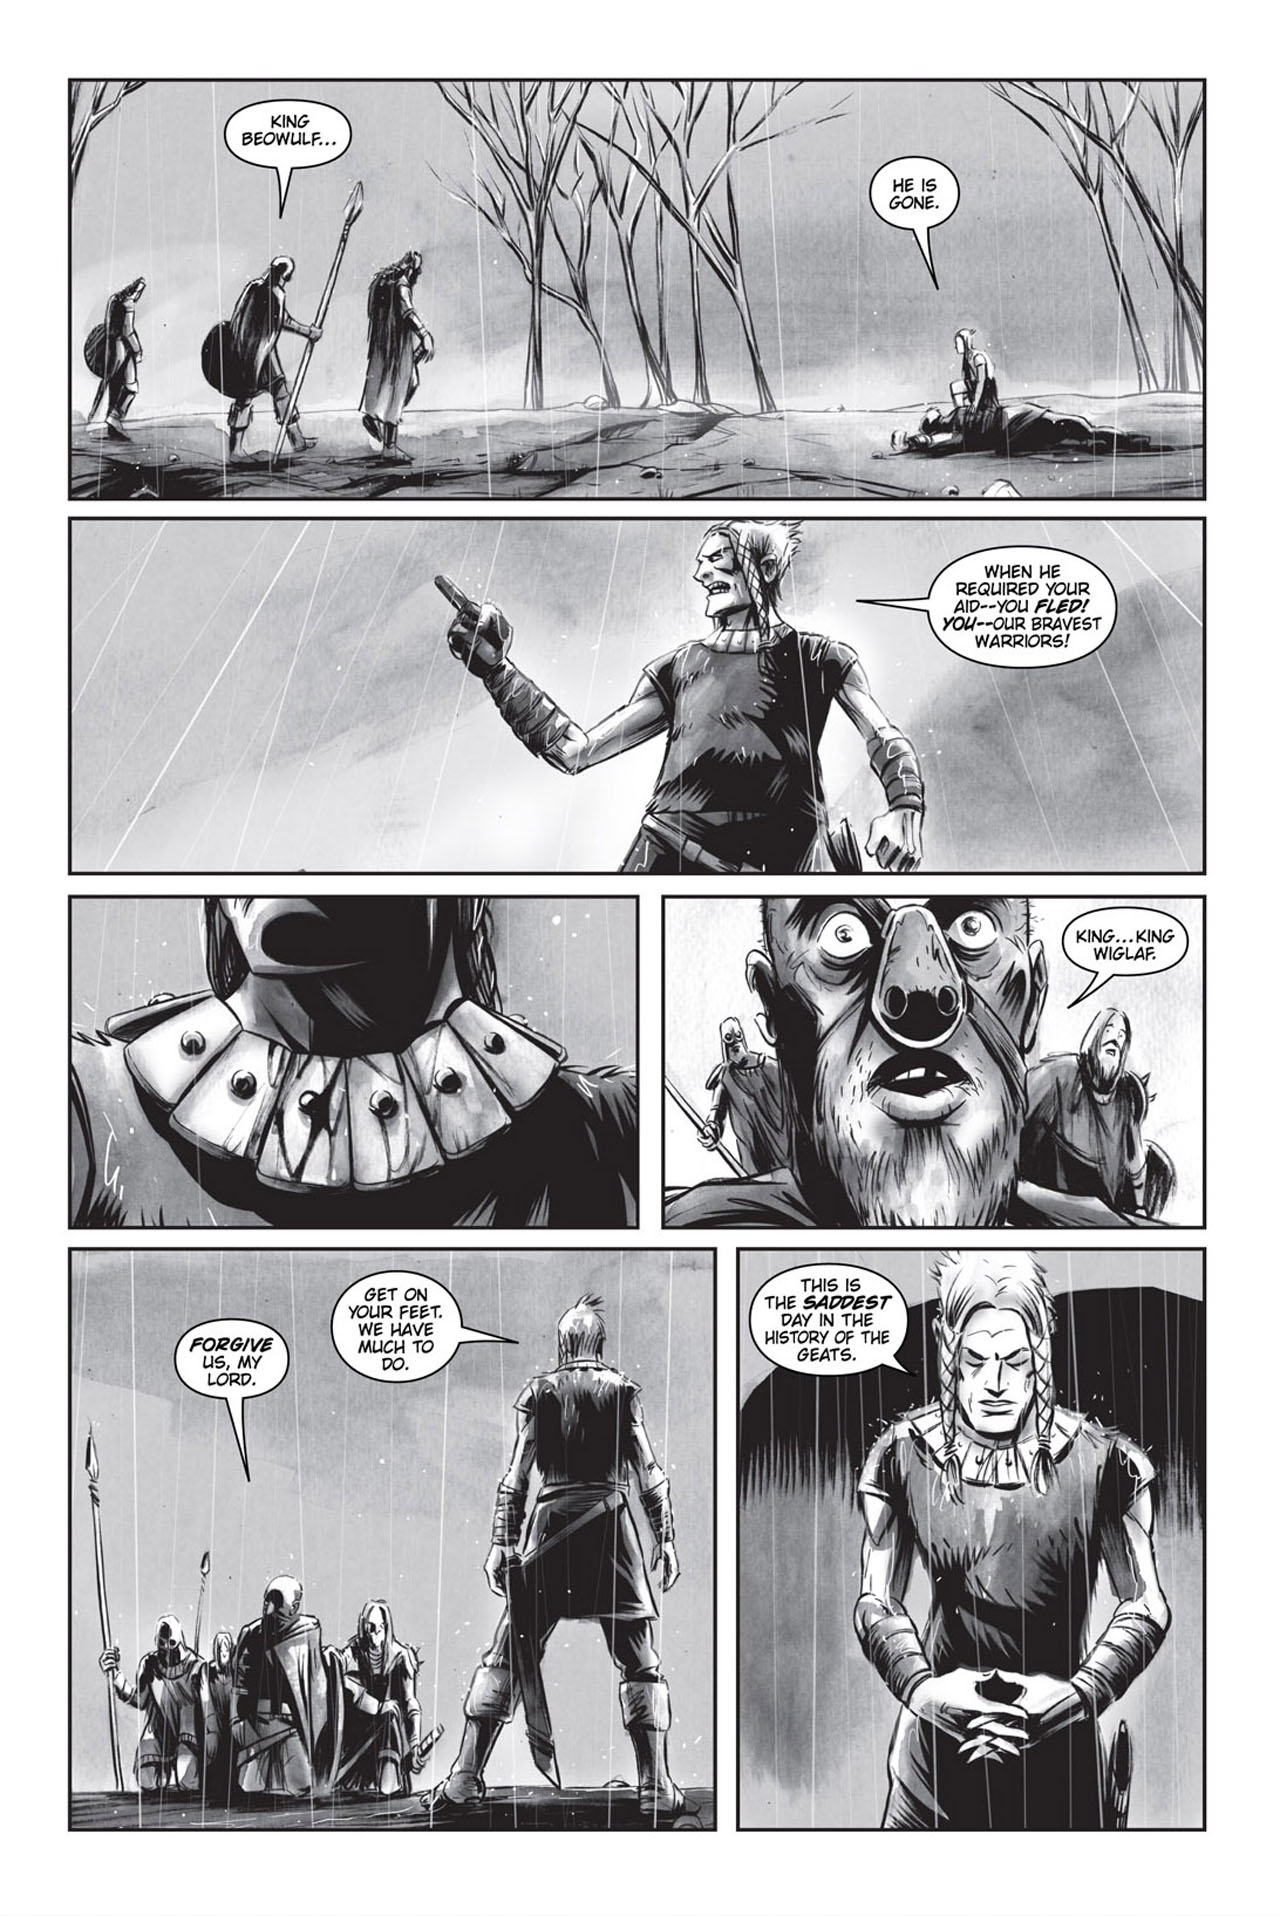 Read online Beowulf: The Graphic Novel comic -  Issue # Full - 56